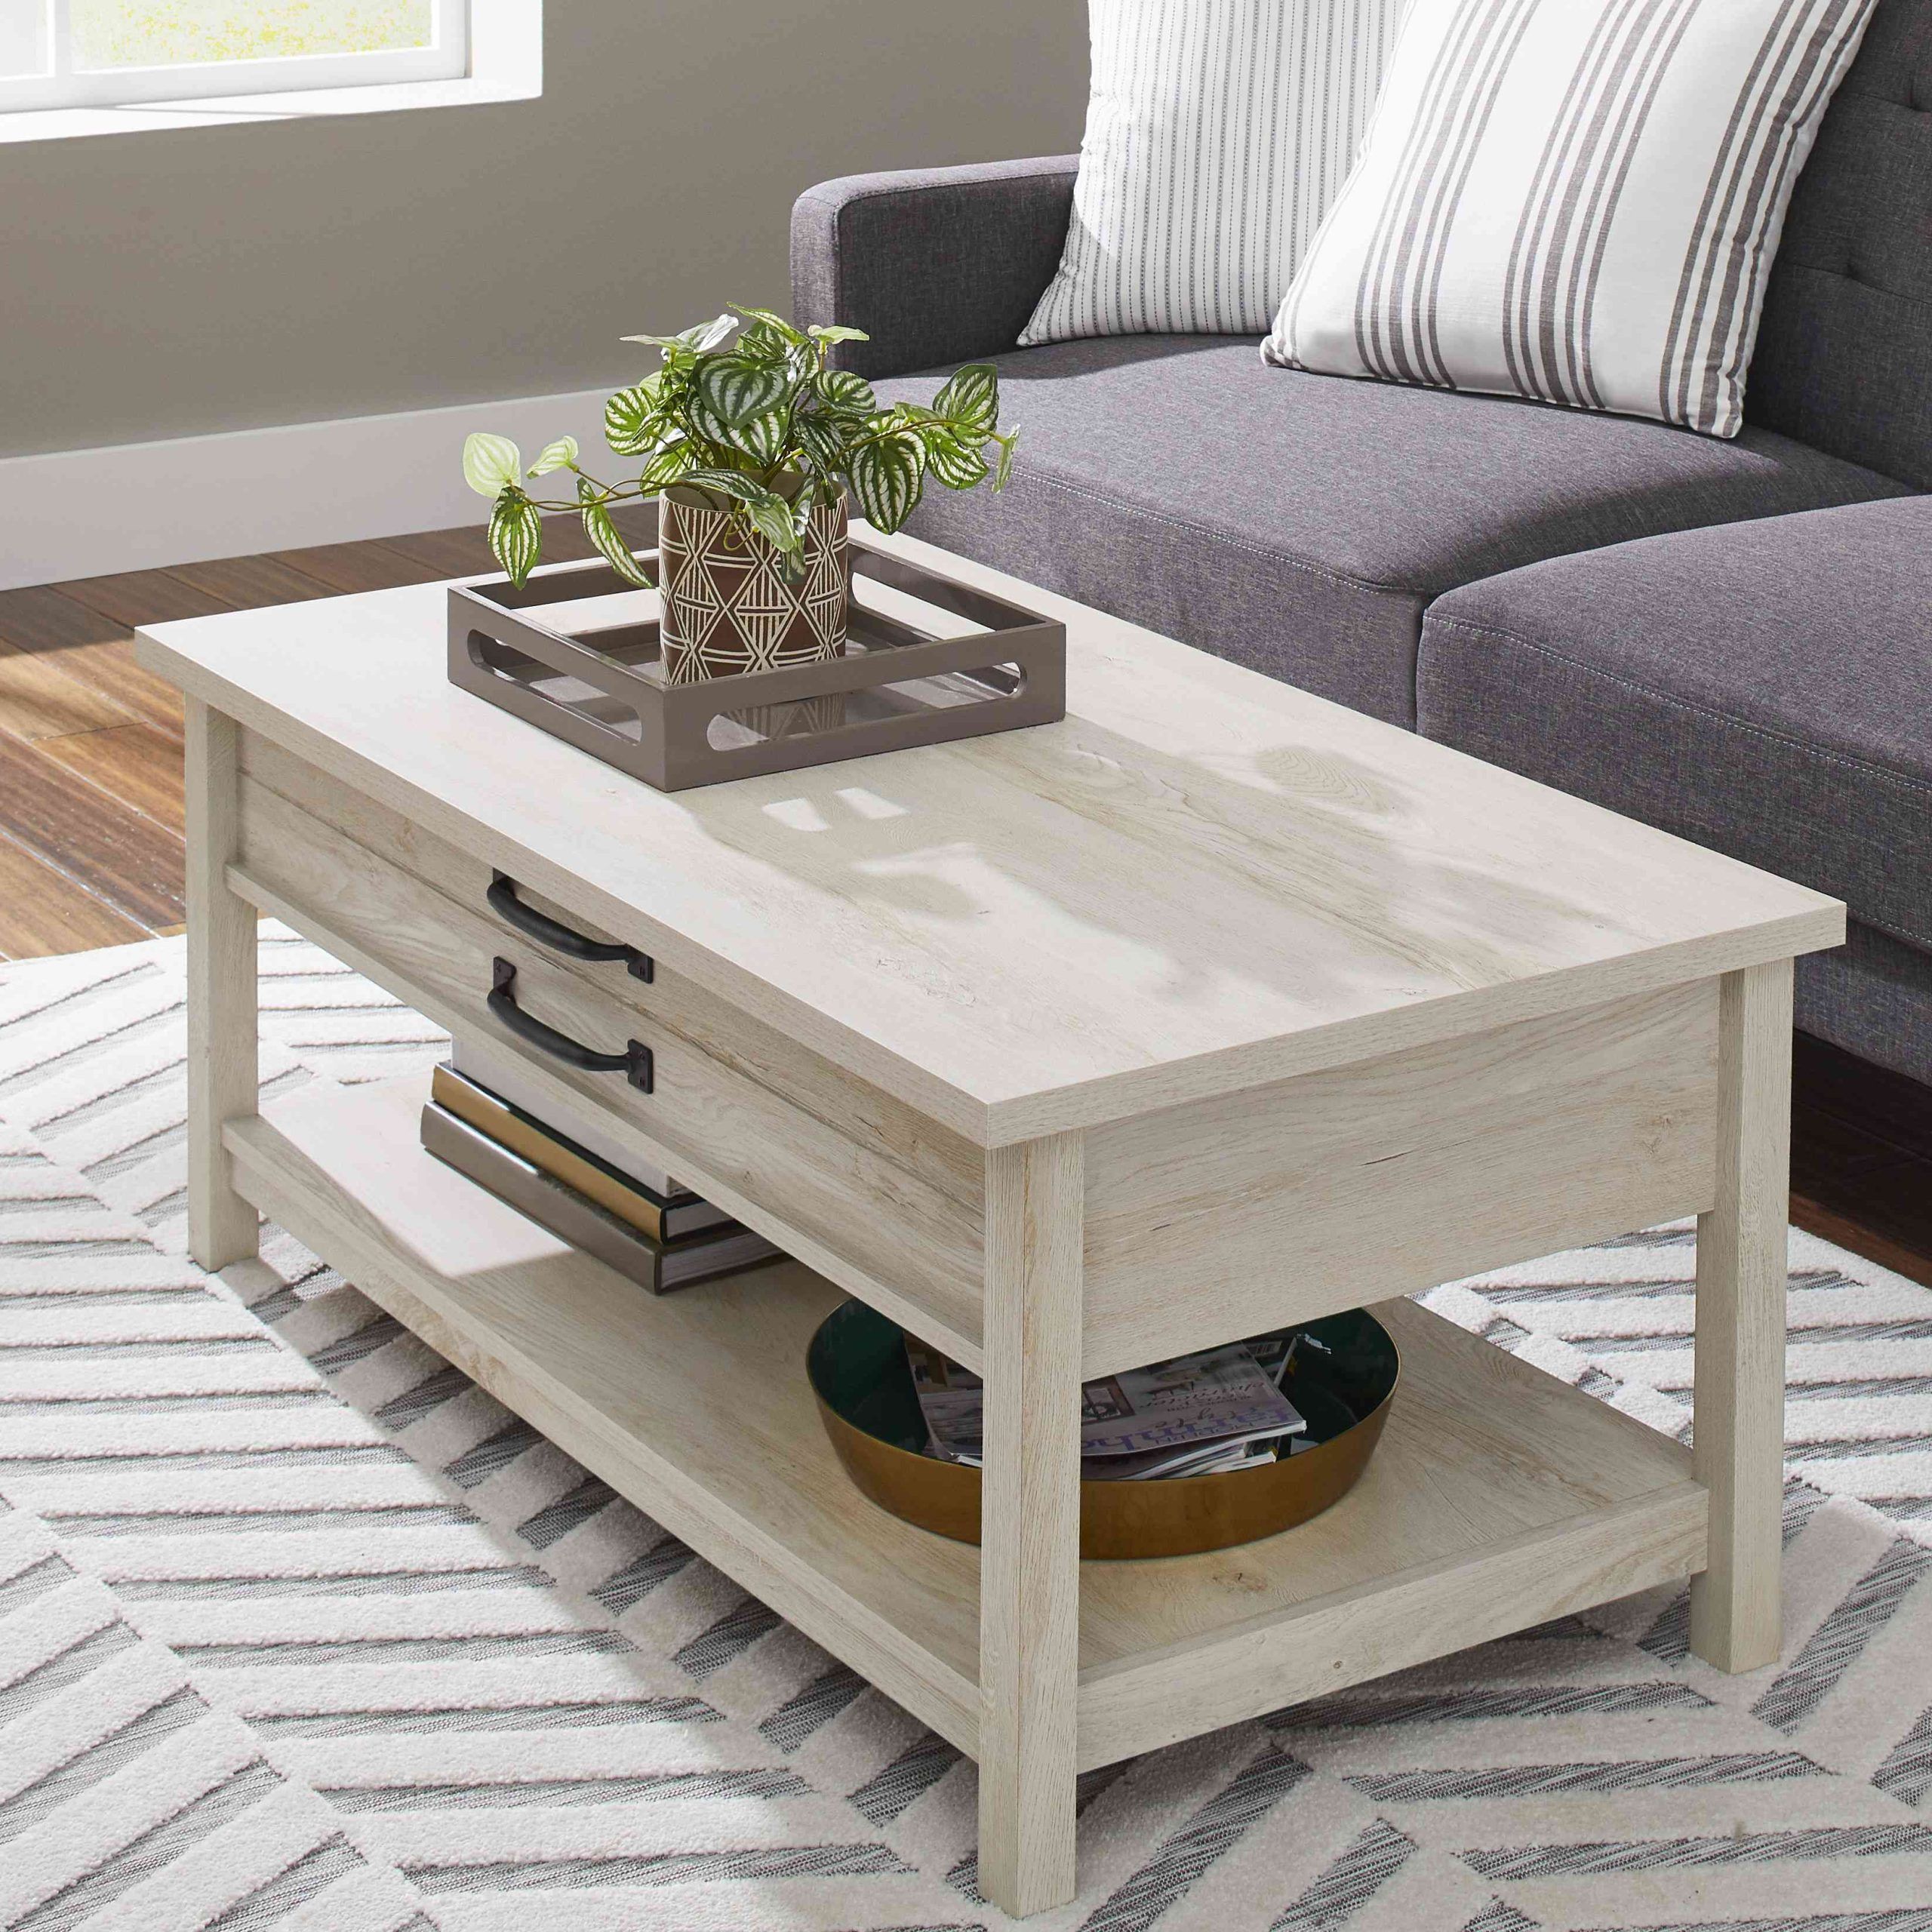 The 9 Best Lift Top Coffee Tables Of 2022 Within Lift Top Coffee Tables With Storage (Gallery 10 of 20)